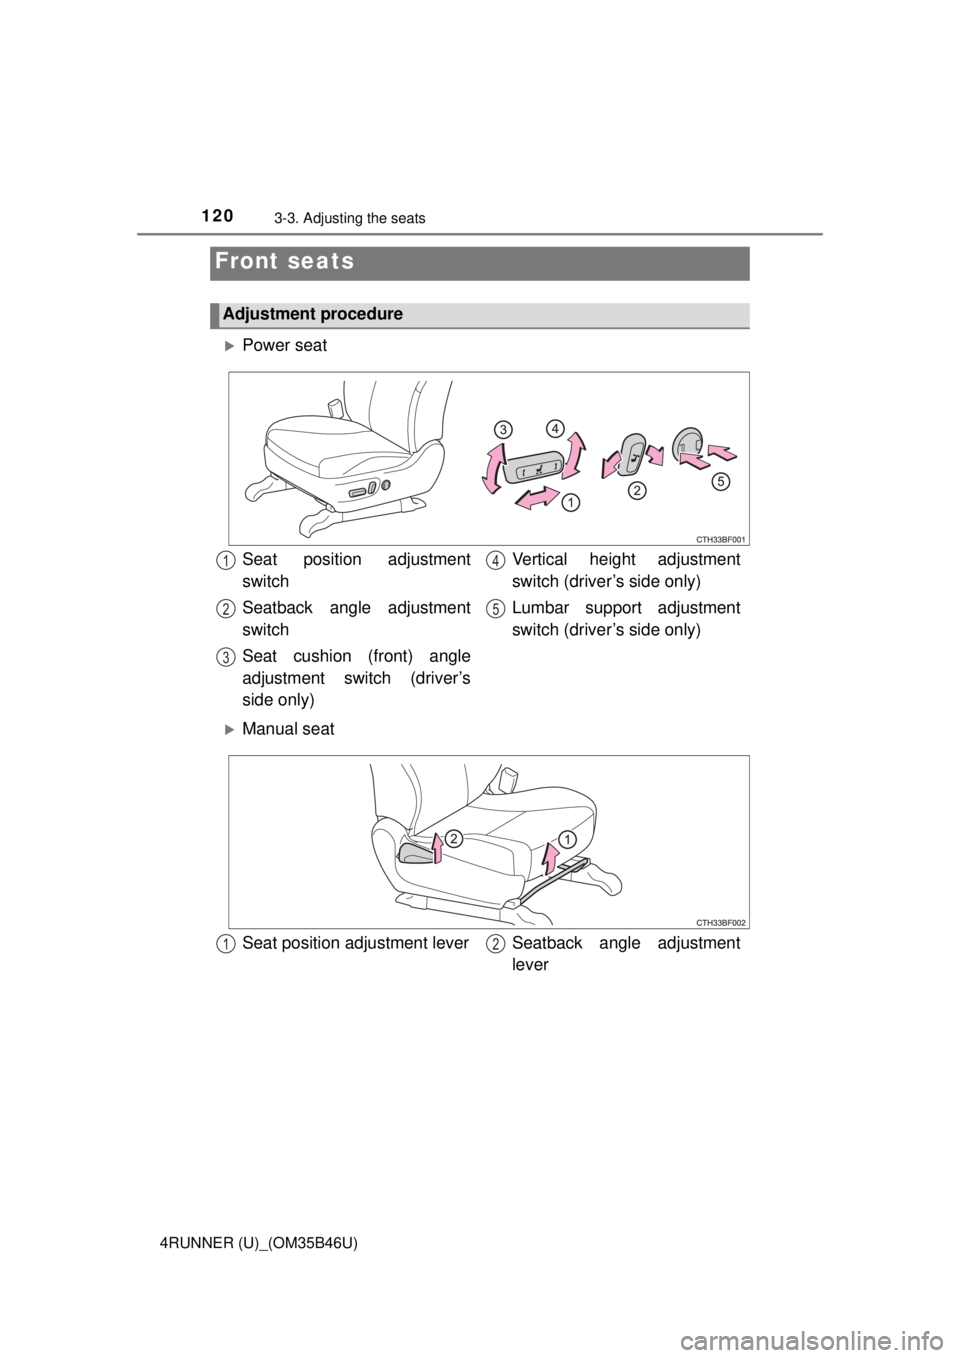 TOYOTA 4RUNNER 2018  Owners Manual (in English) 120
4RUNNER (U)_(OM35B46U)
3-3. Adjusting the seats
Power seat
Manual seat
Front seats
Adjustment procedure
Seat position adjustment
switch
Seatback angle adjustment
switch
Seat cushion (front) 